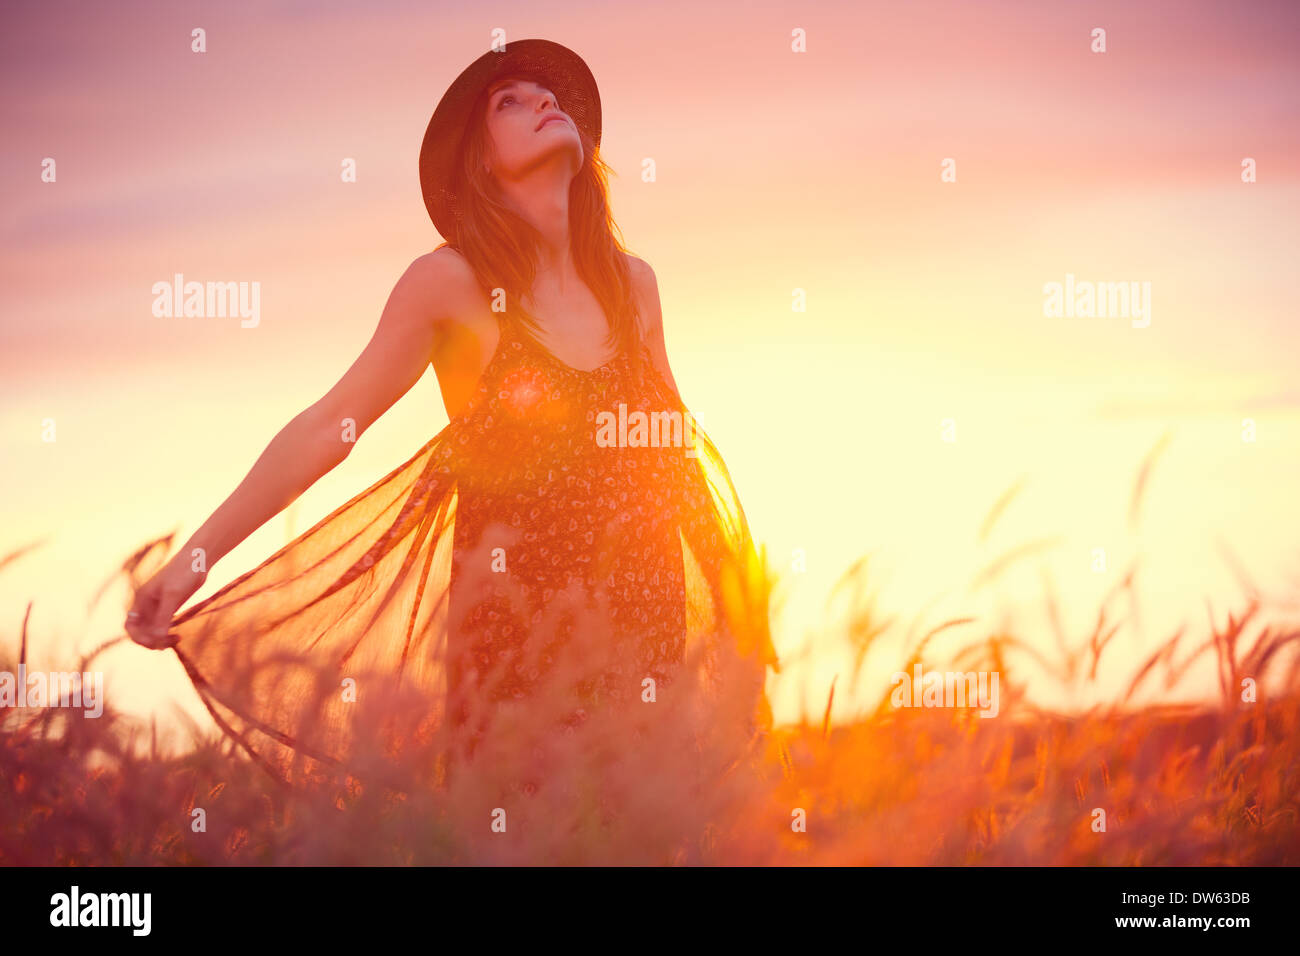 Beautiful woman in golden field at sunset, Fashion lifestyle, Vibrant color, Backlit warm tones Stock Photo